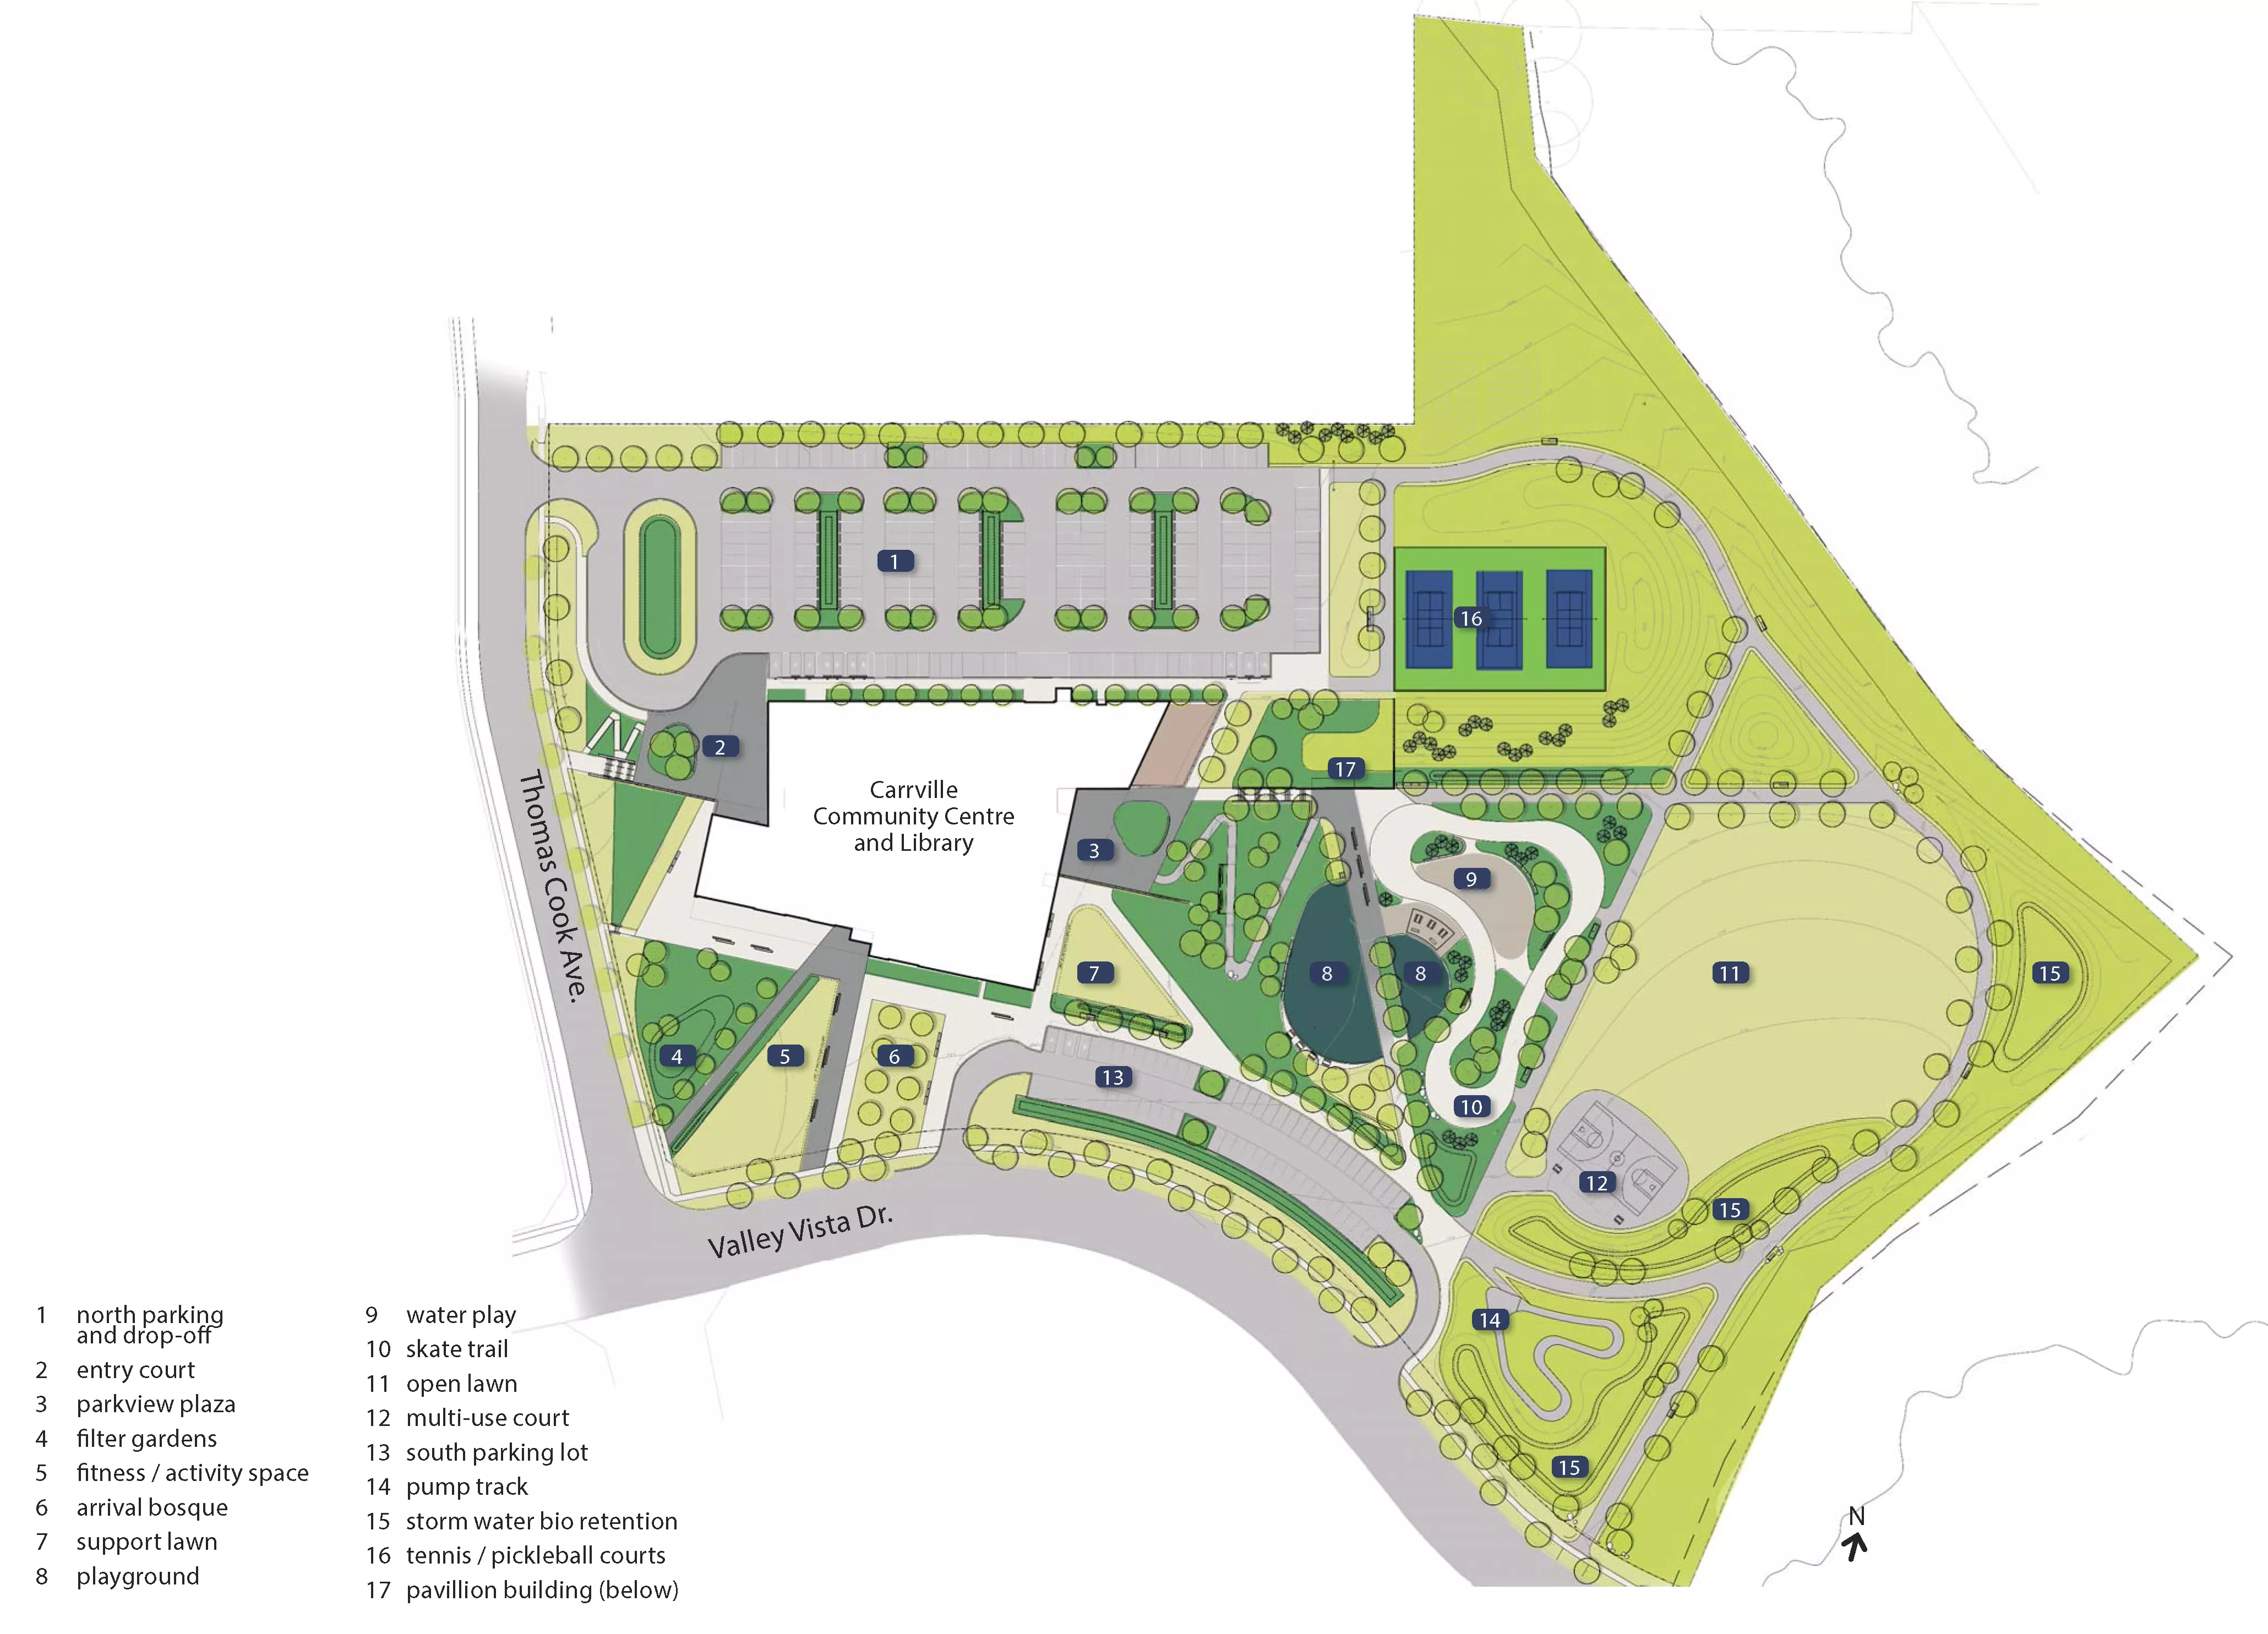 Carrville Site Plan map and legend